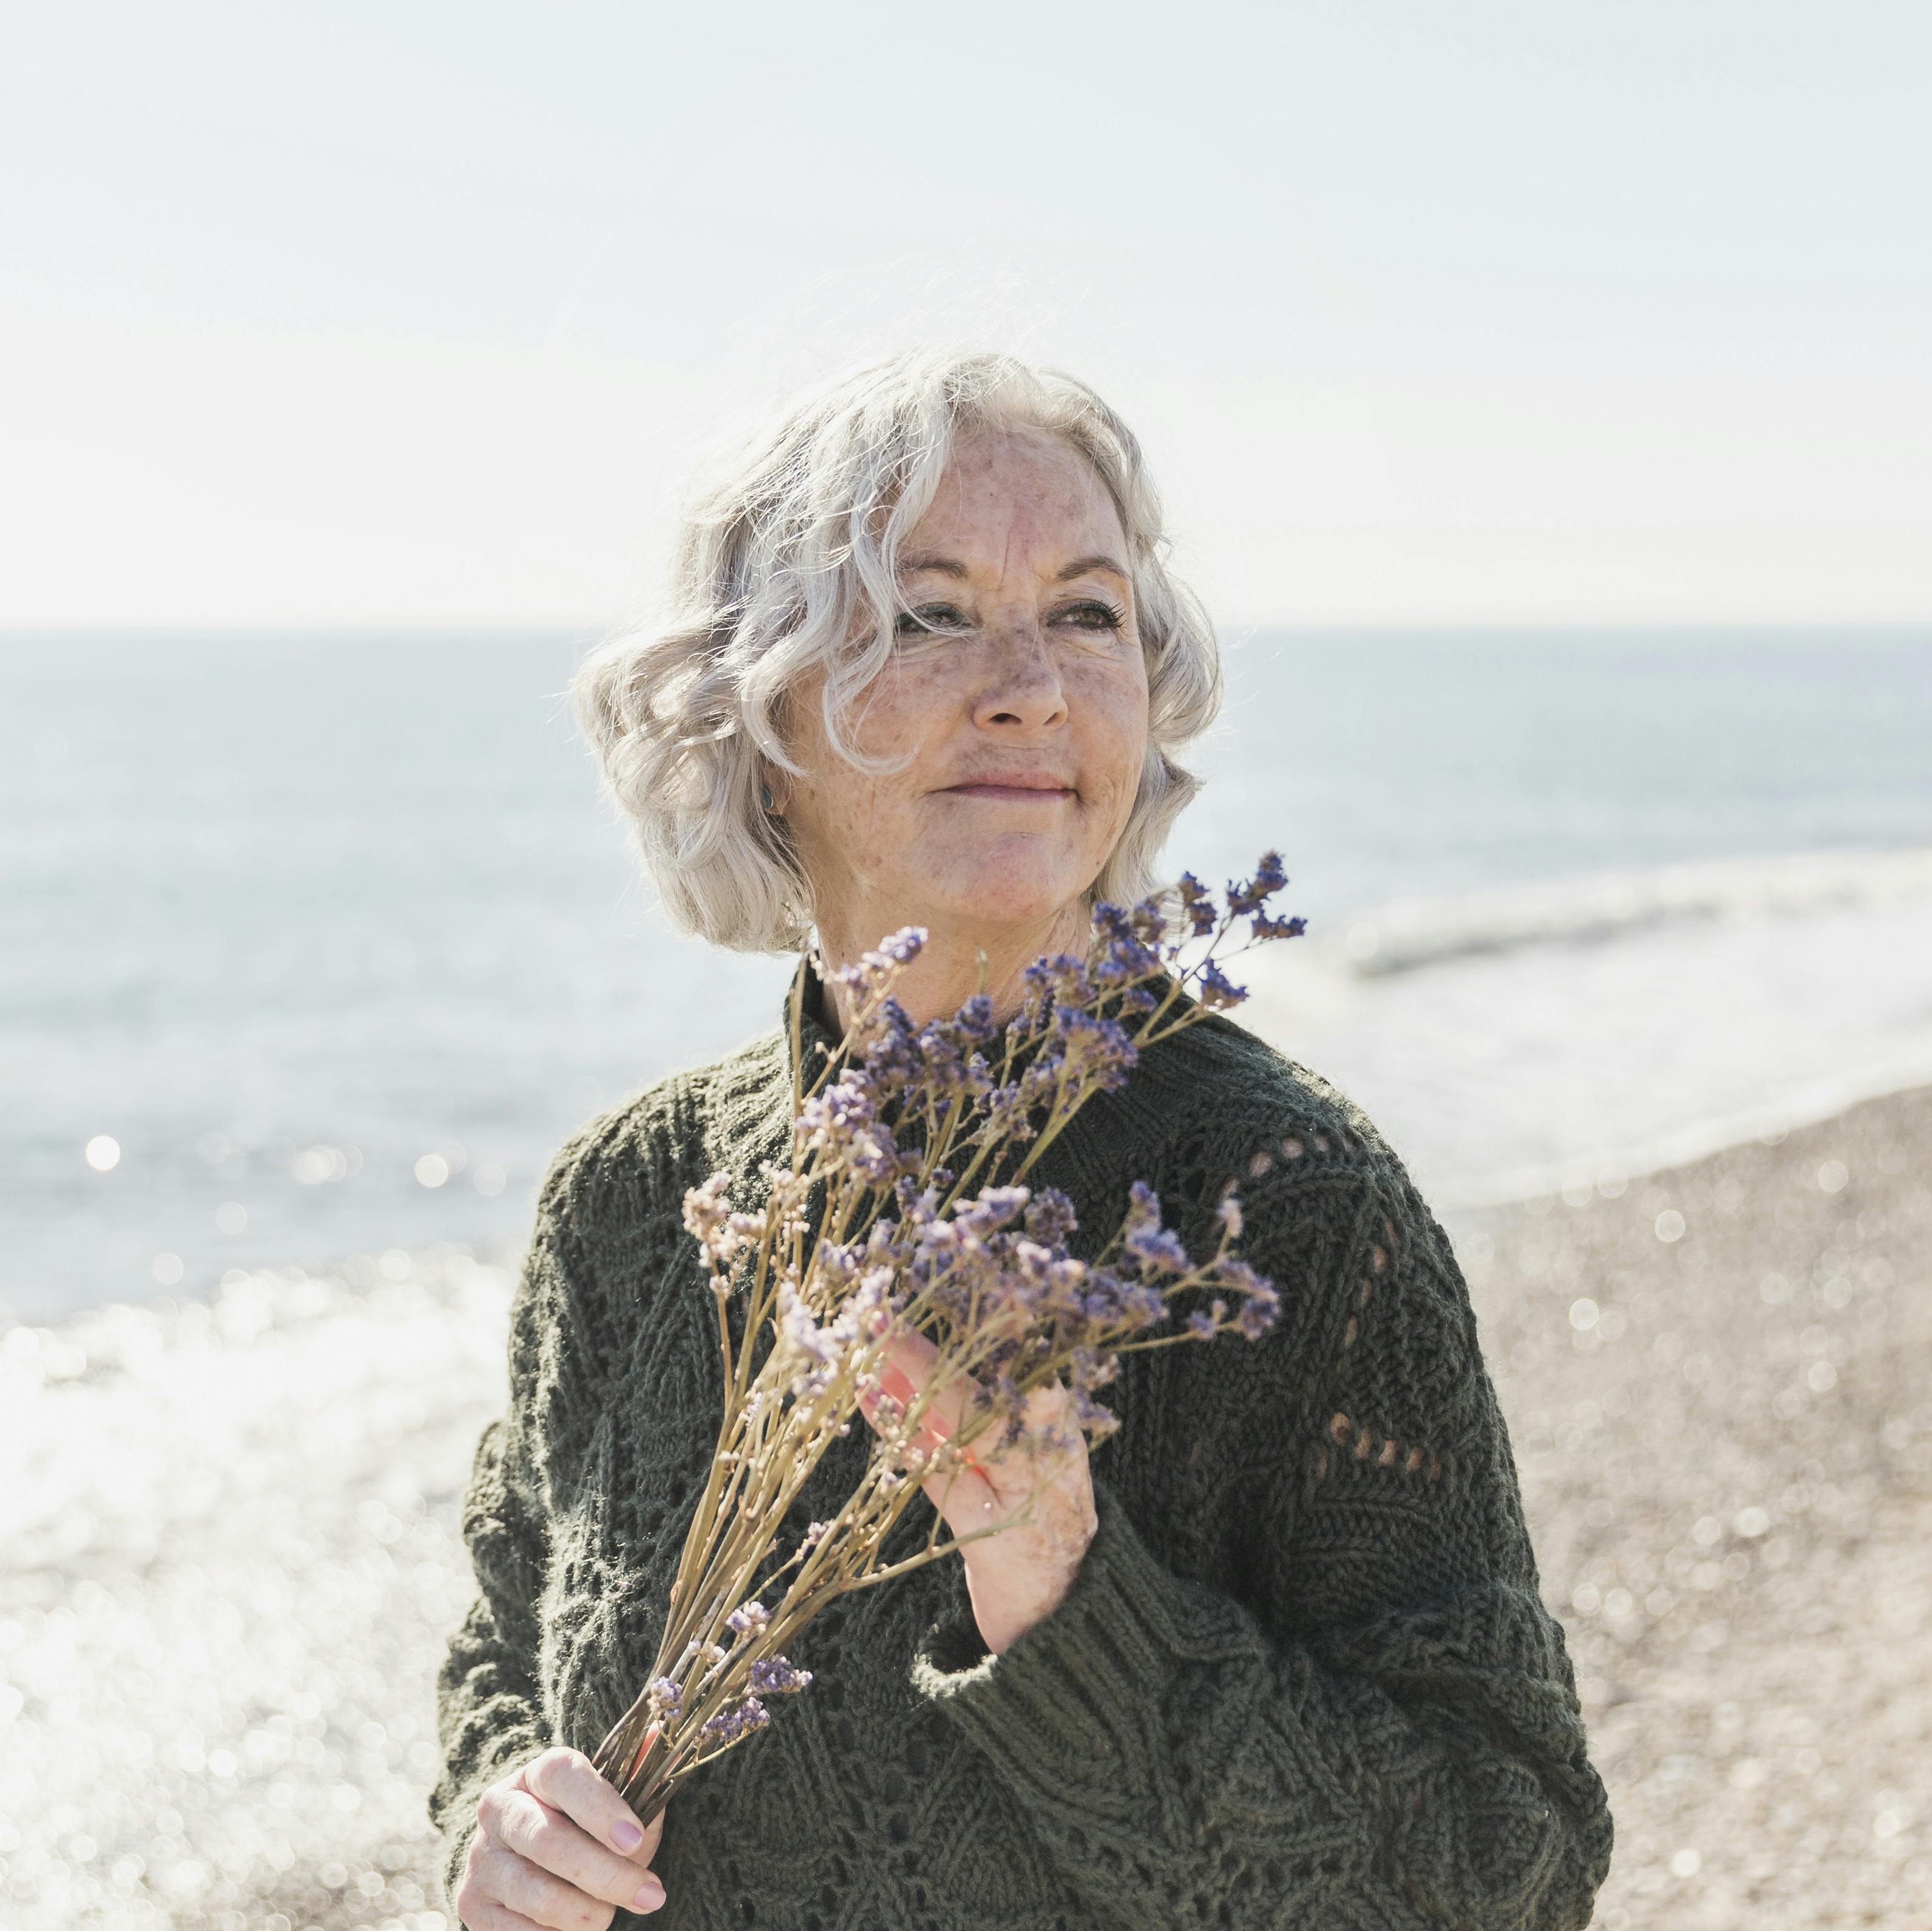 White-haired woman at the beach holding a bouquet of dried flowers.